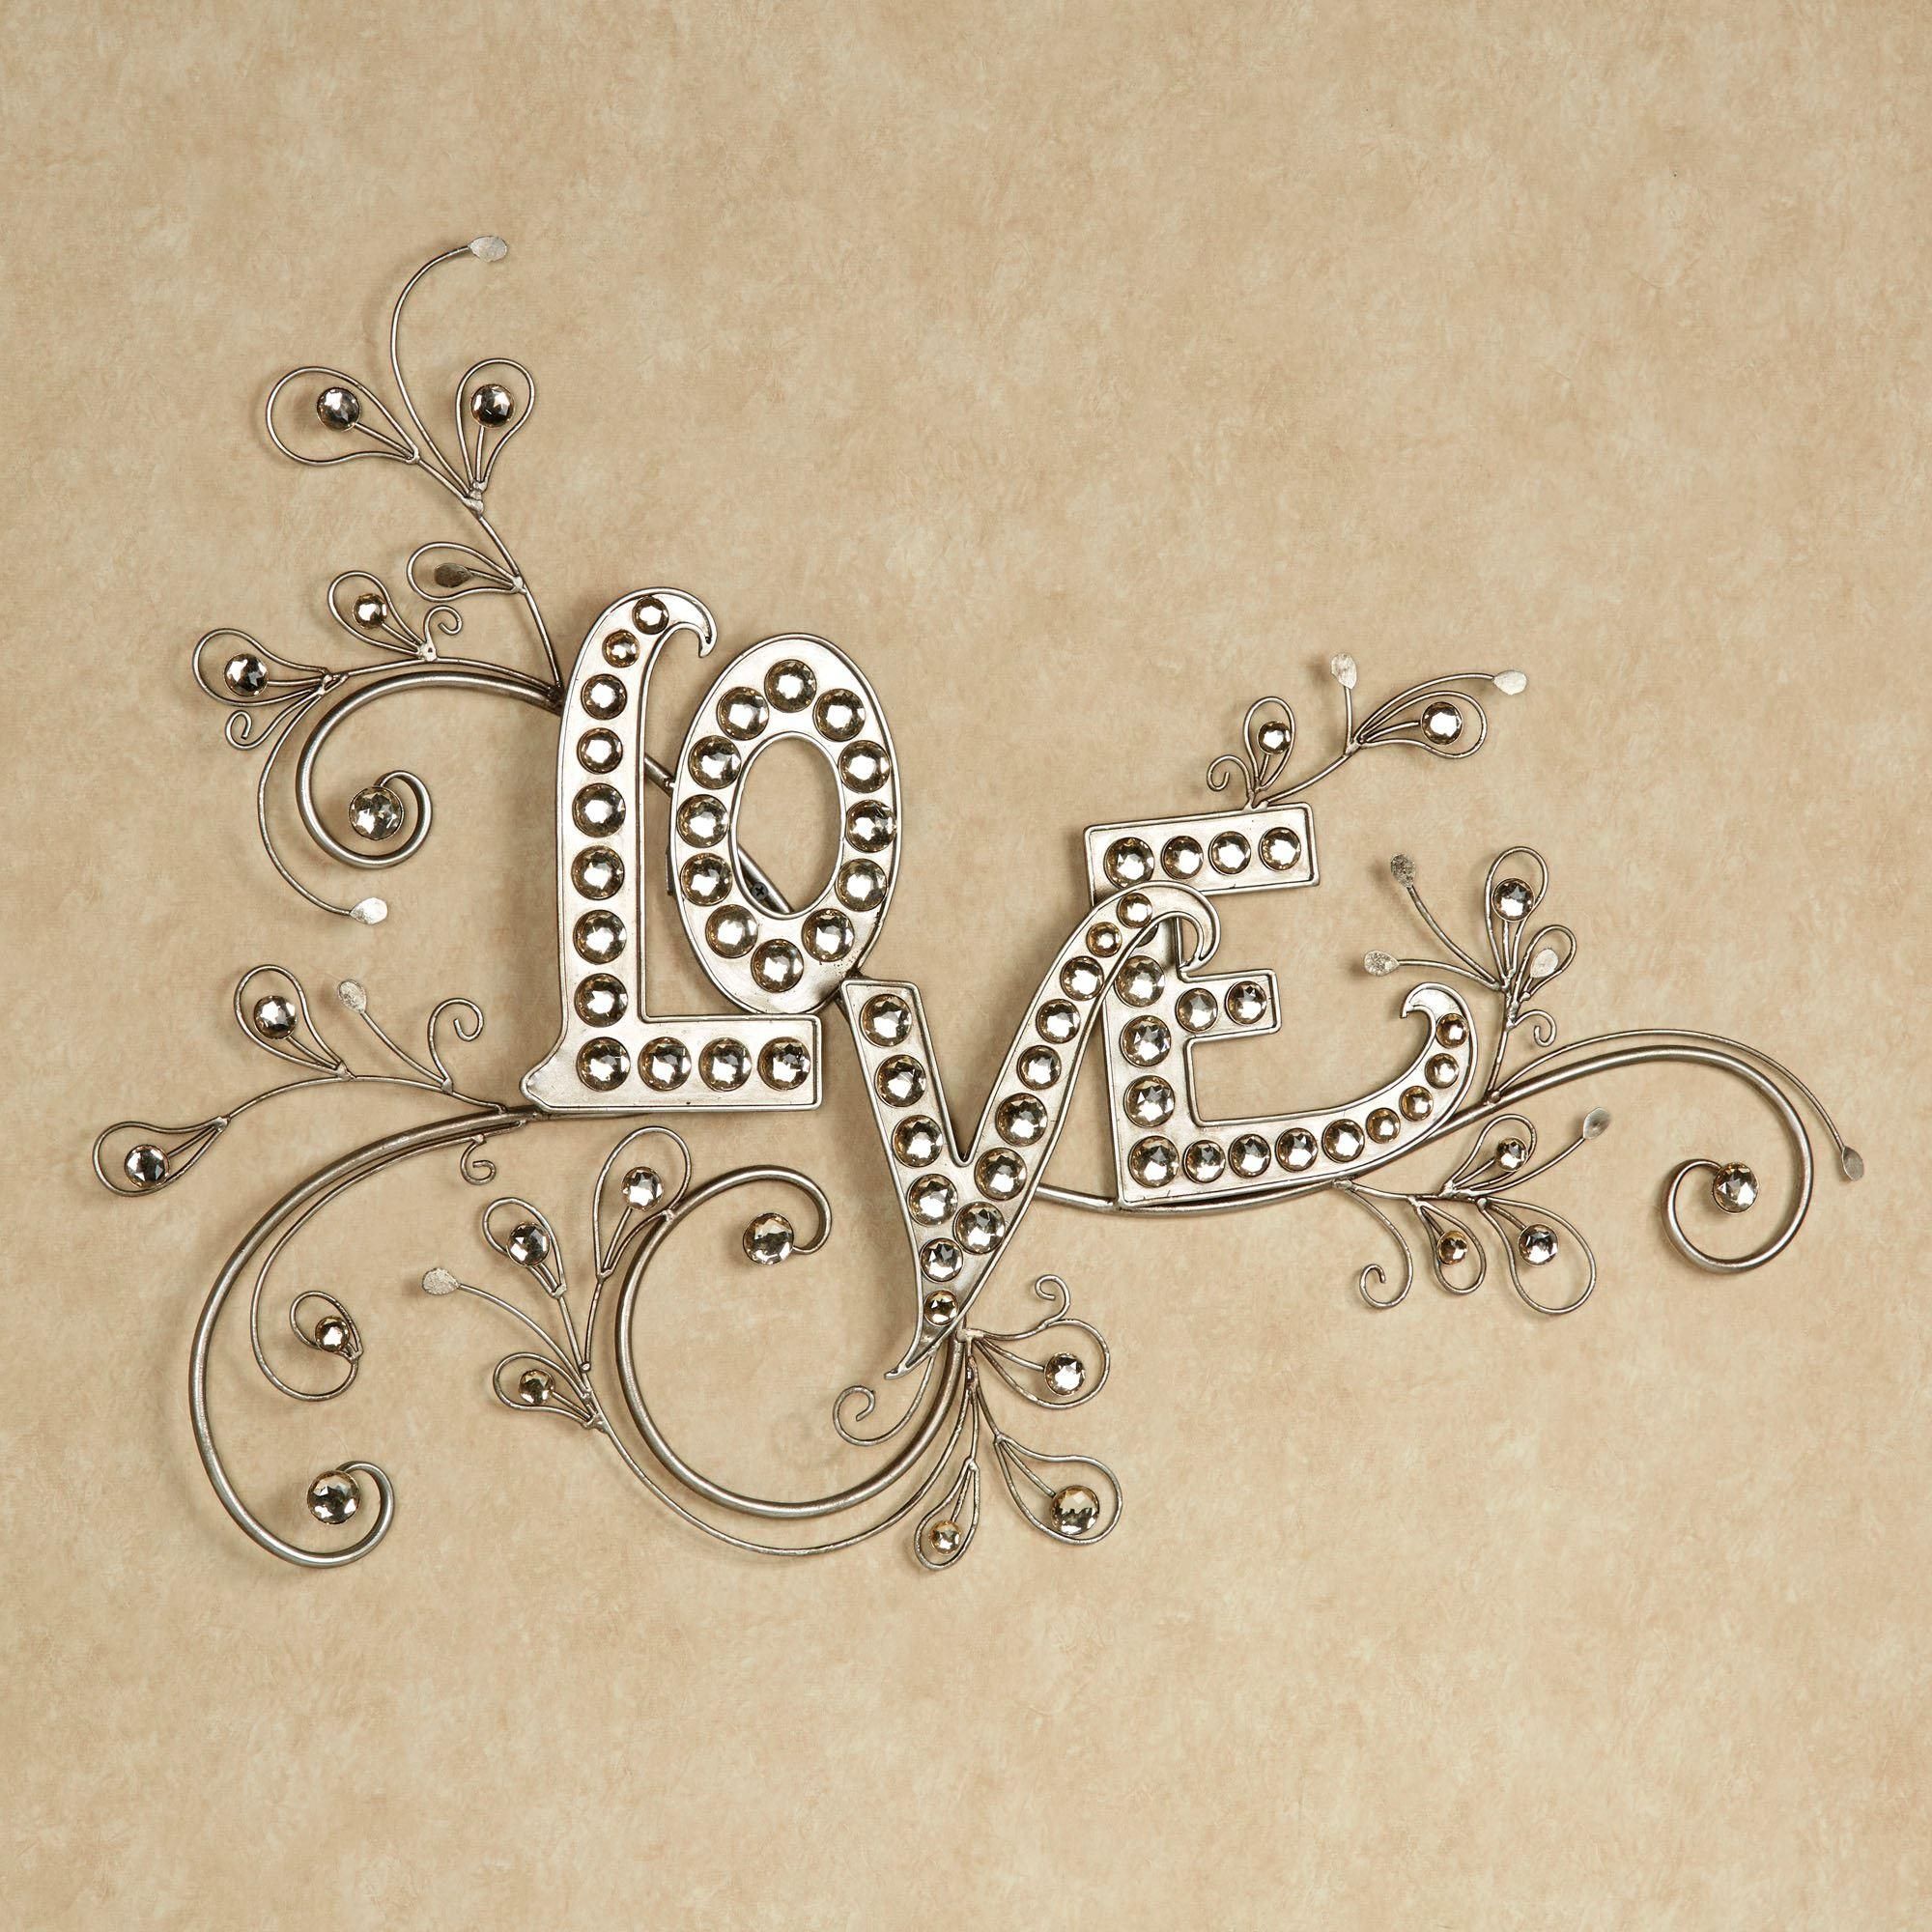 Sparkling Love Gem Word Wall Art Intended For Live Love Laugh Metal Wall Decor (View 16 of 20)